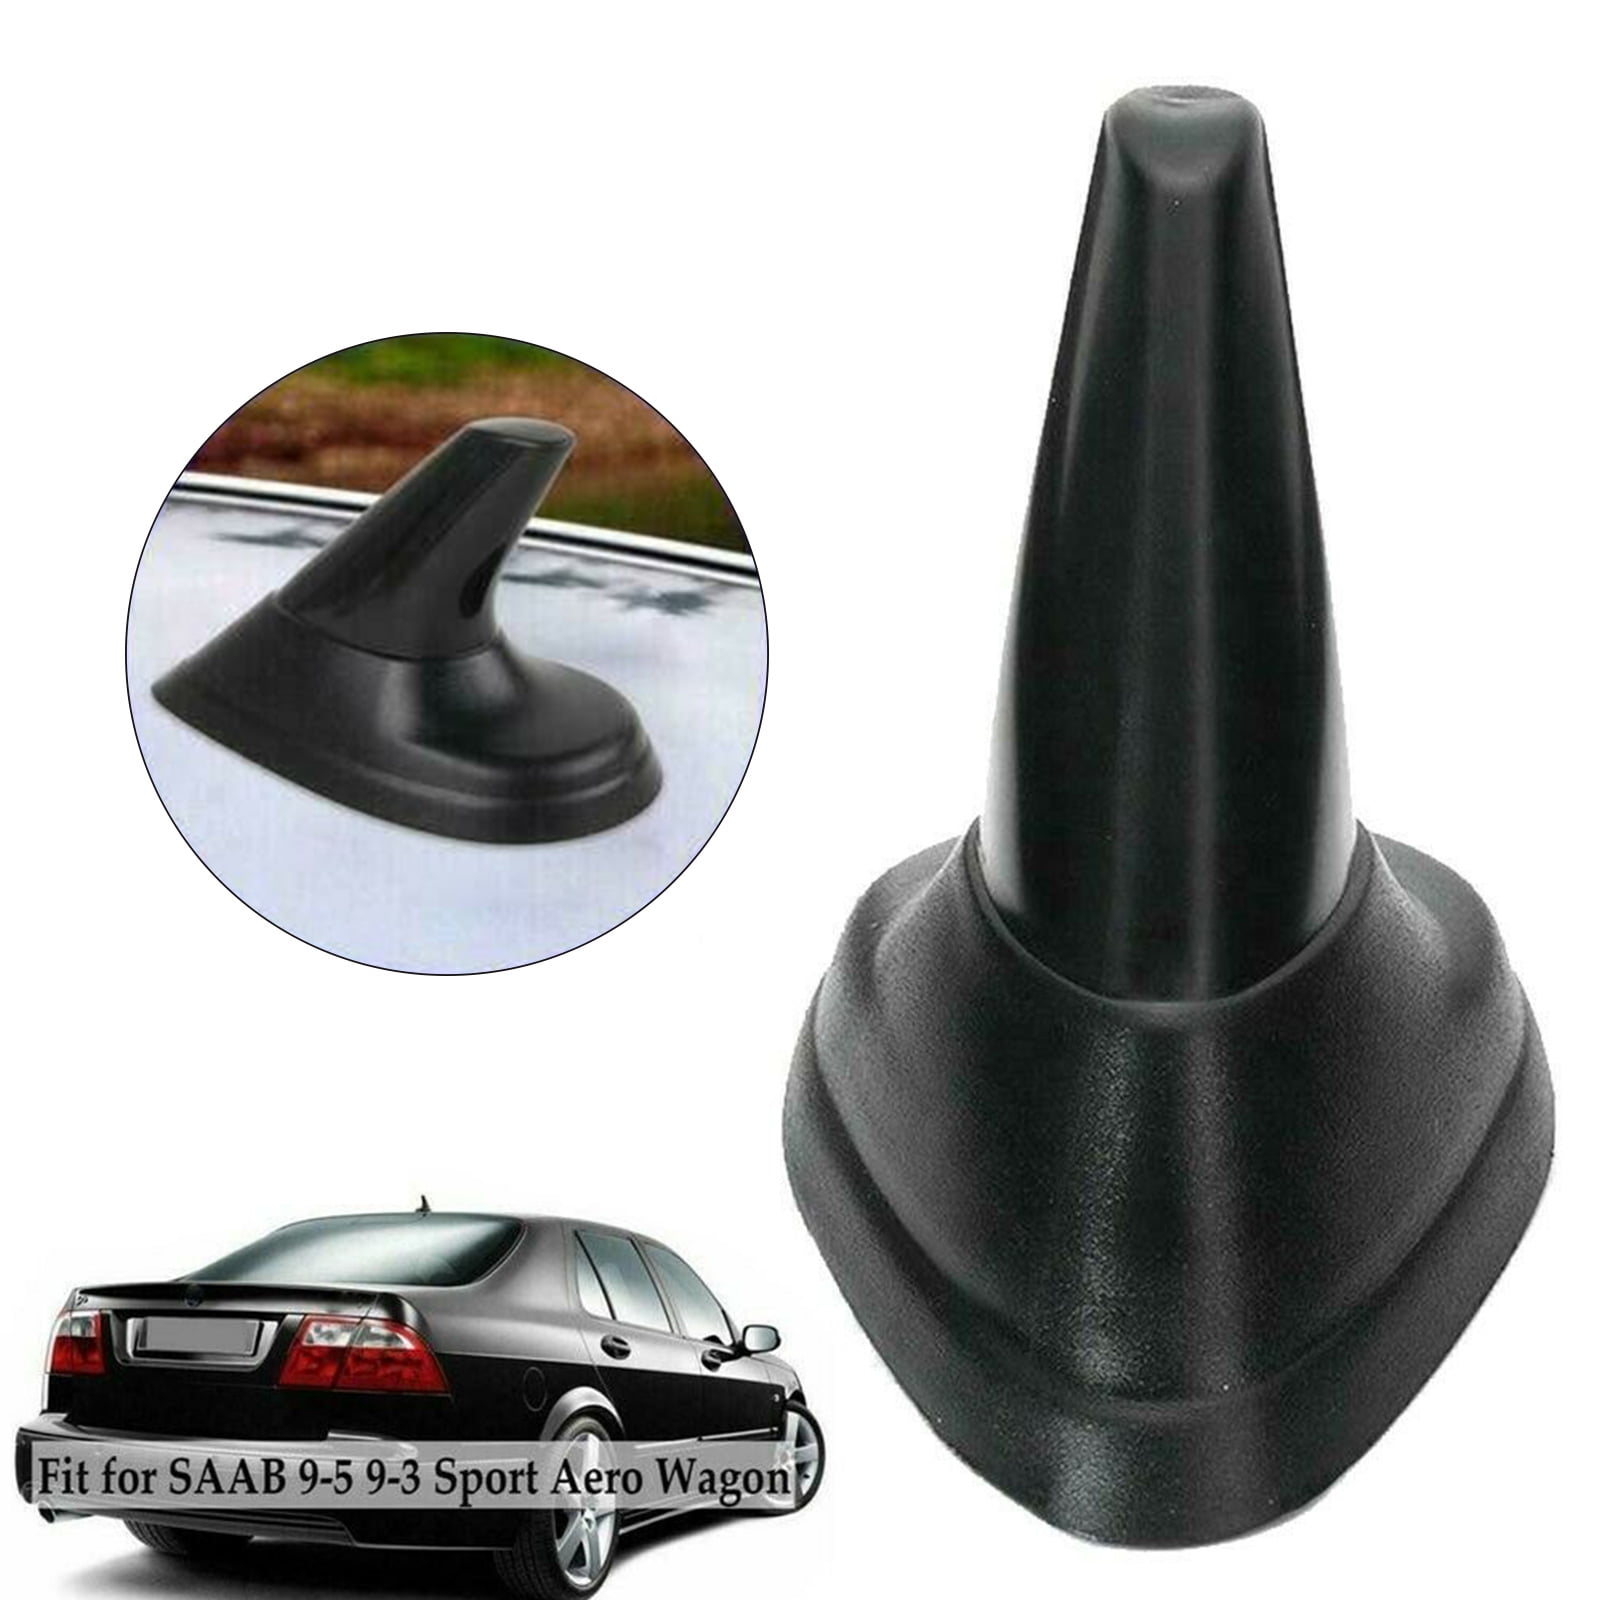 Paint Glossy Black Fit For SAAB Fin Dummy Antenna 1 Piece 9 4 9 2 